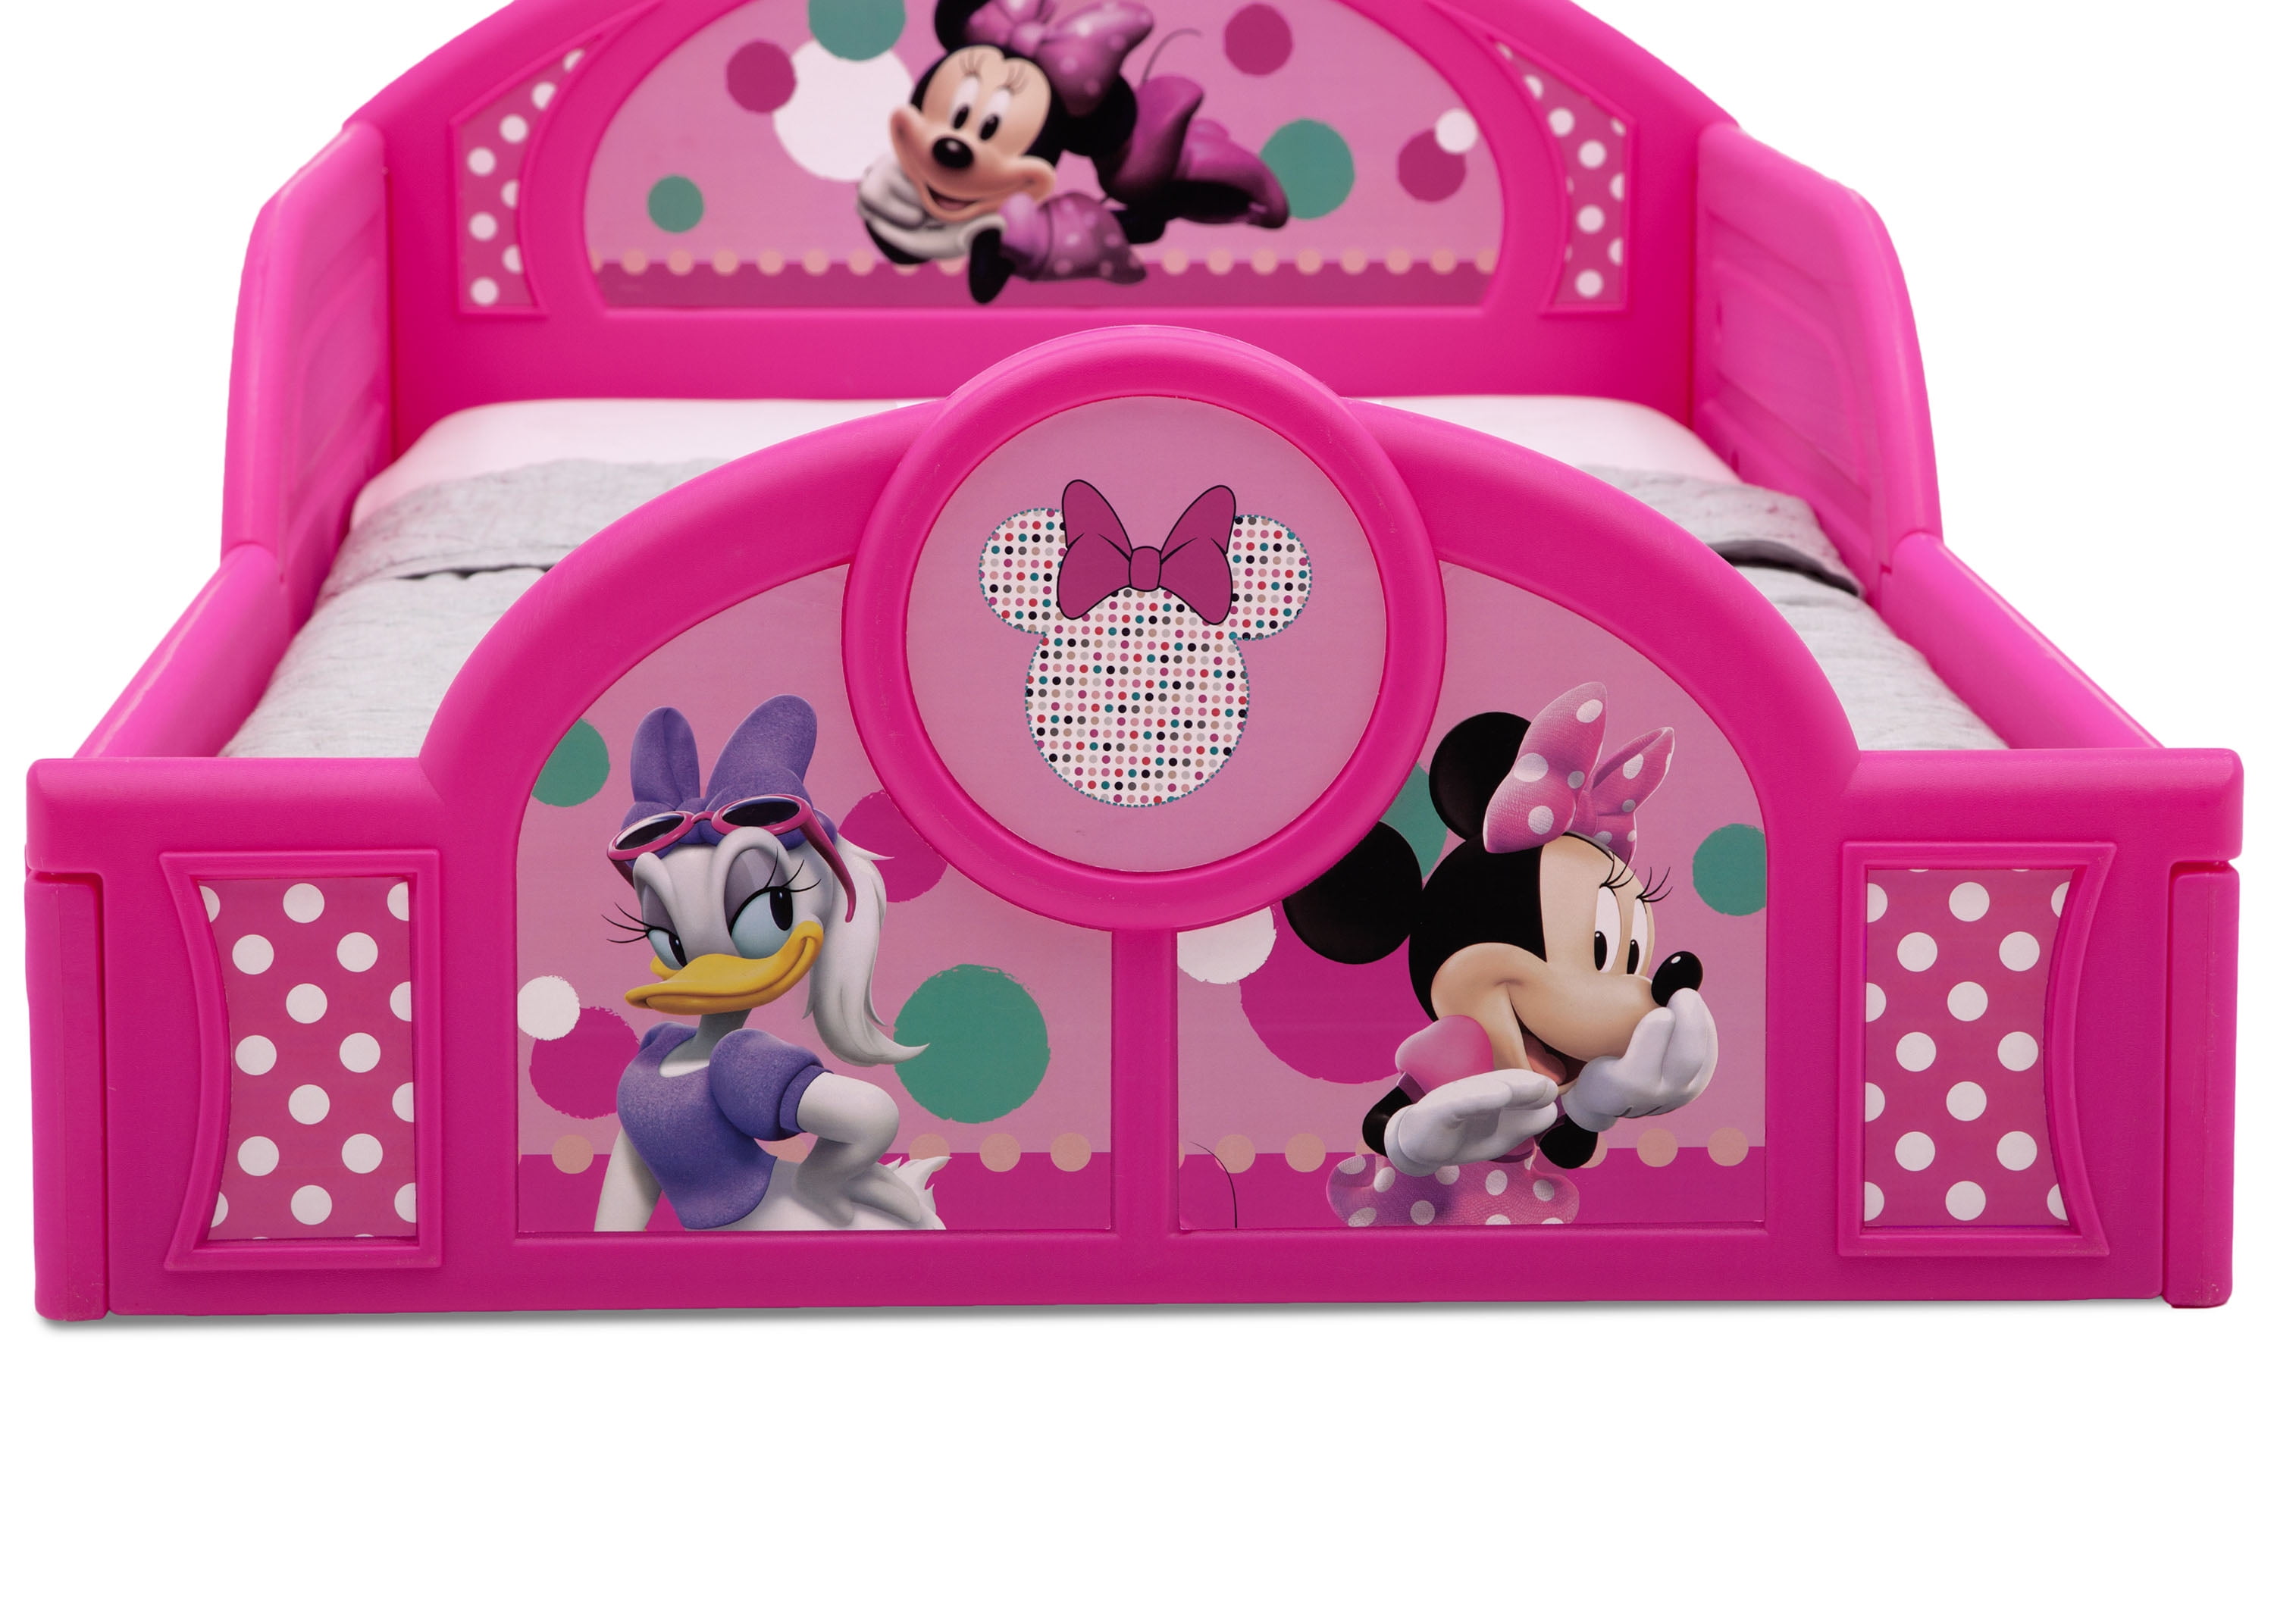 Kinder Flow Fibre Cot Mattress Included Worlds Apart Minnie Mouse Toddler Bed With Underbed Storage